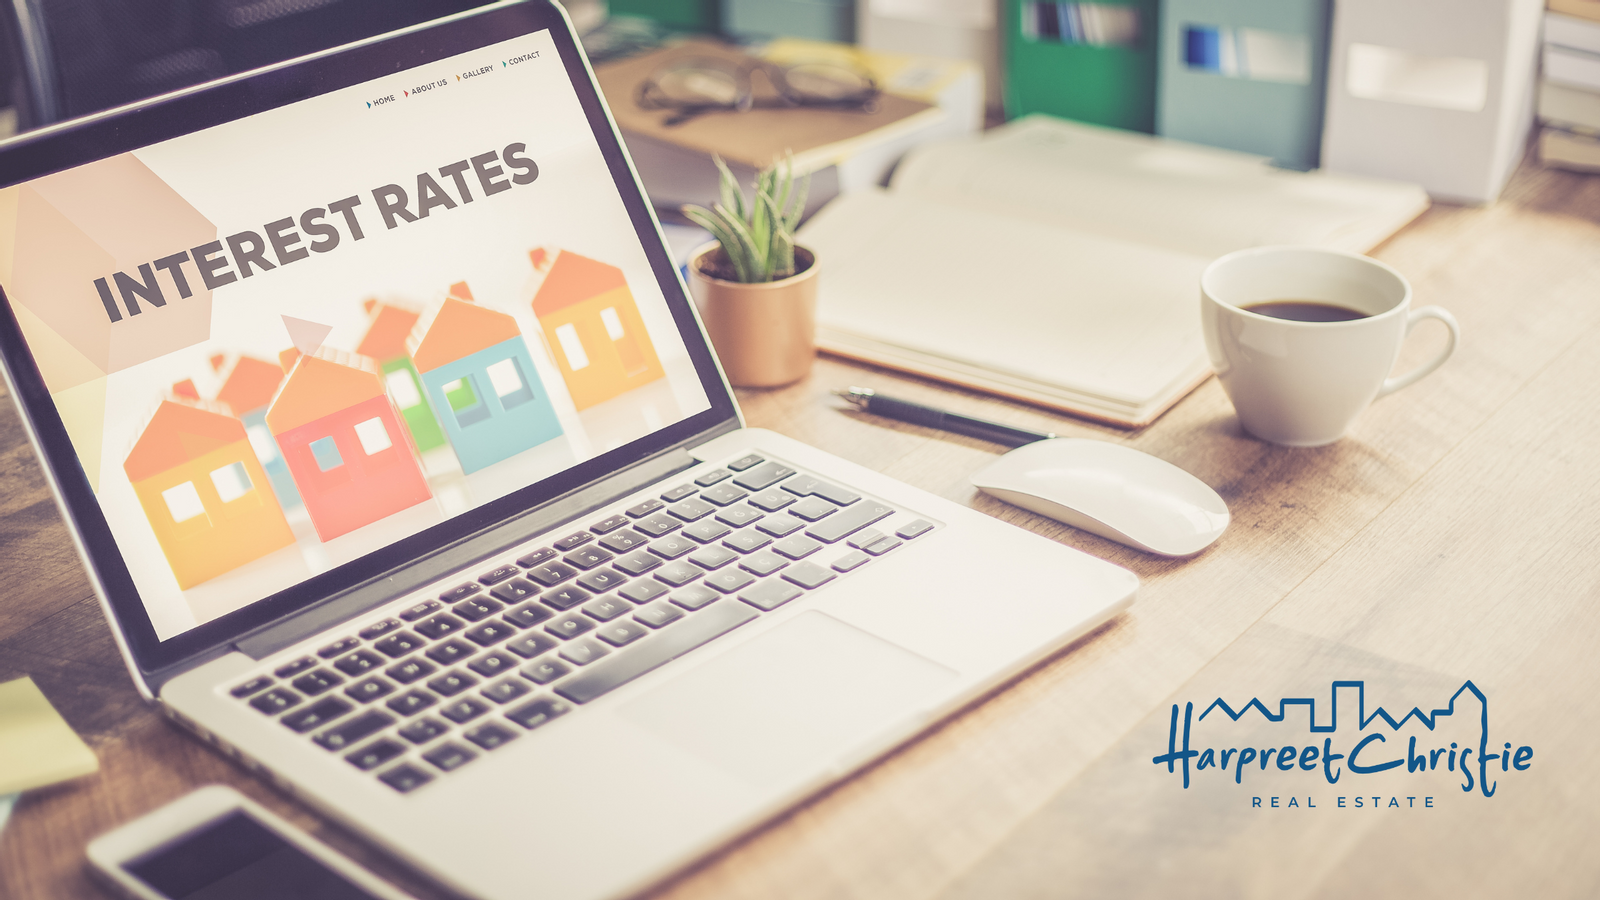 What to Do with Your Low Interest Rate?